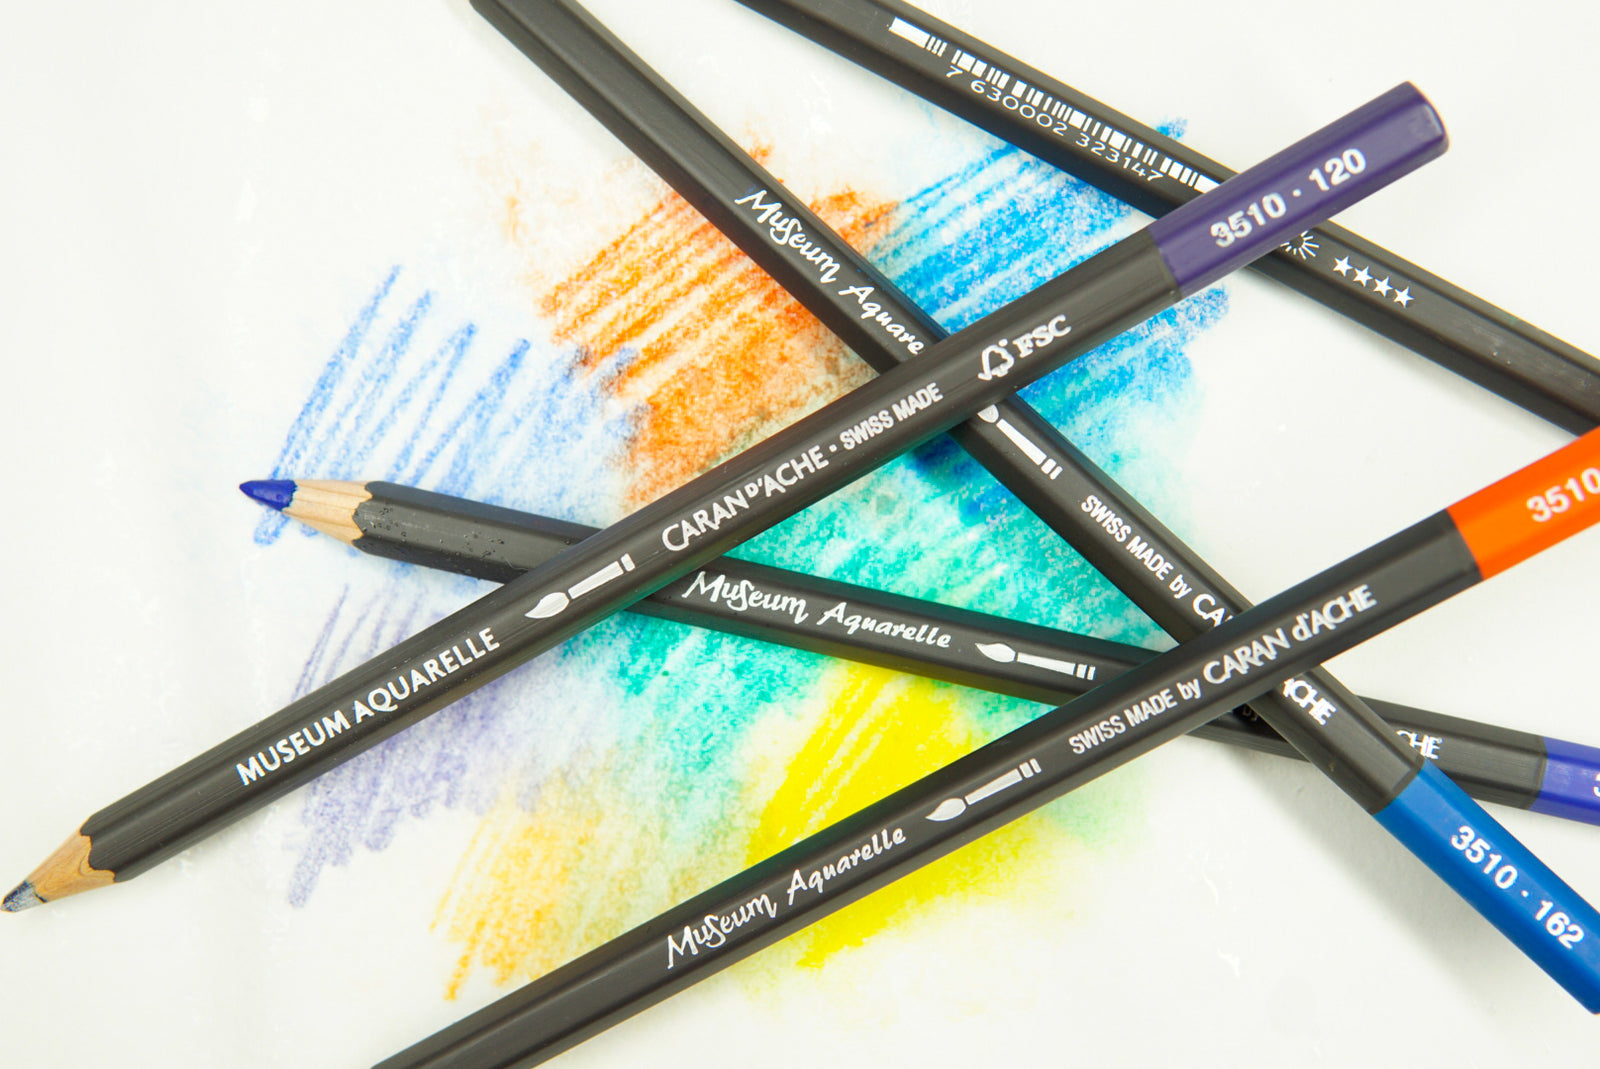 Caran d'Ache Museum Aquarelle pencil  The appeal of a water-soluble pencil  - STEP BY STEP ART